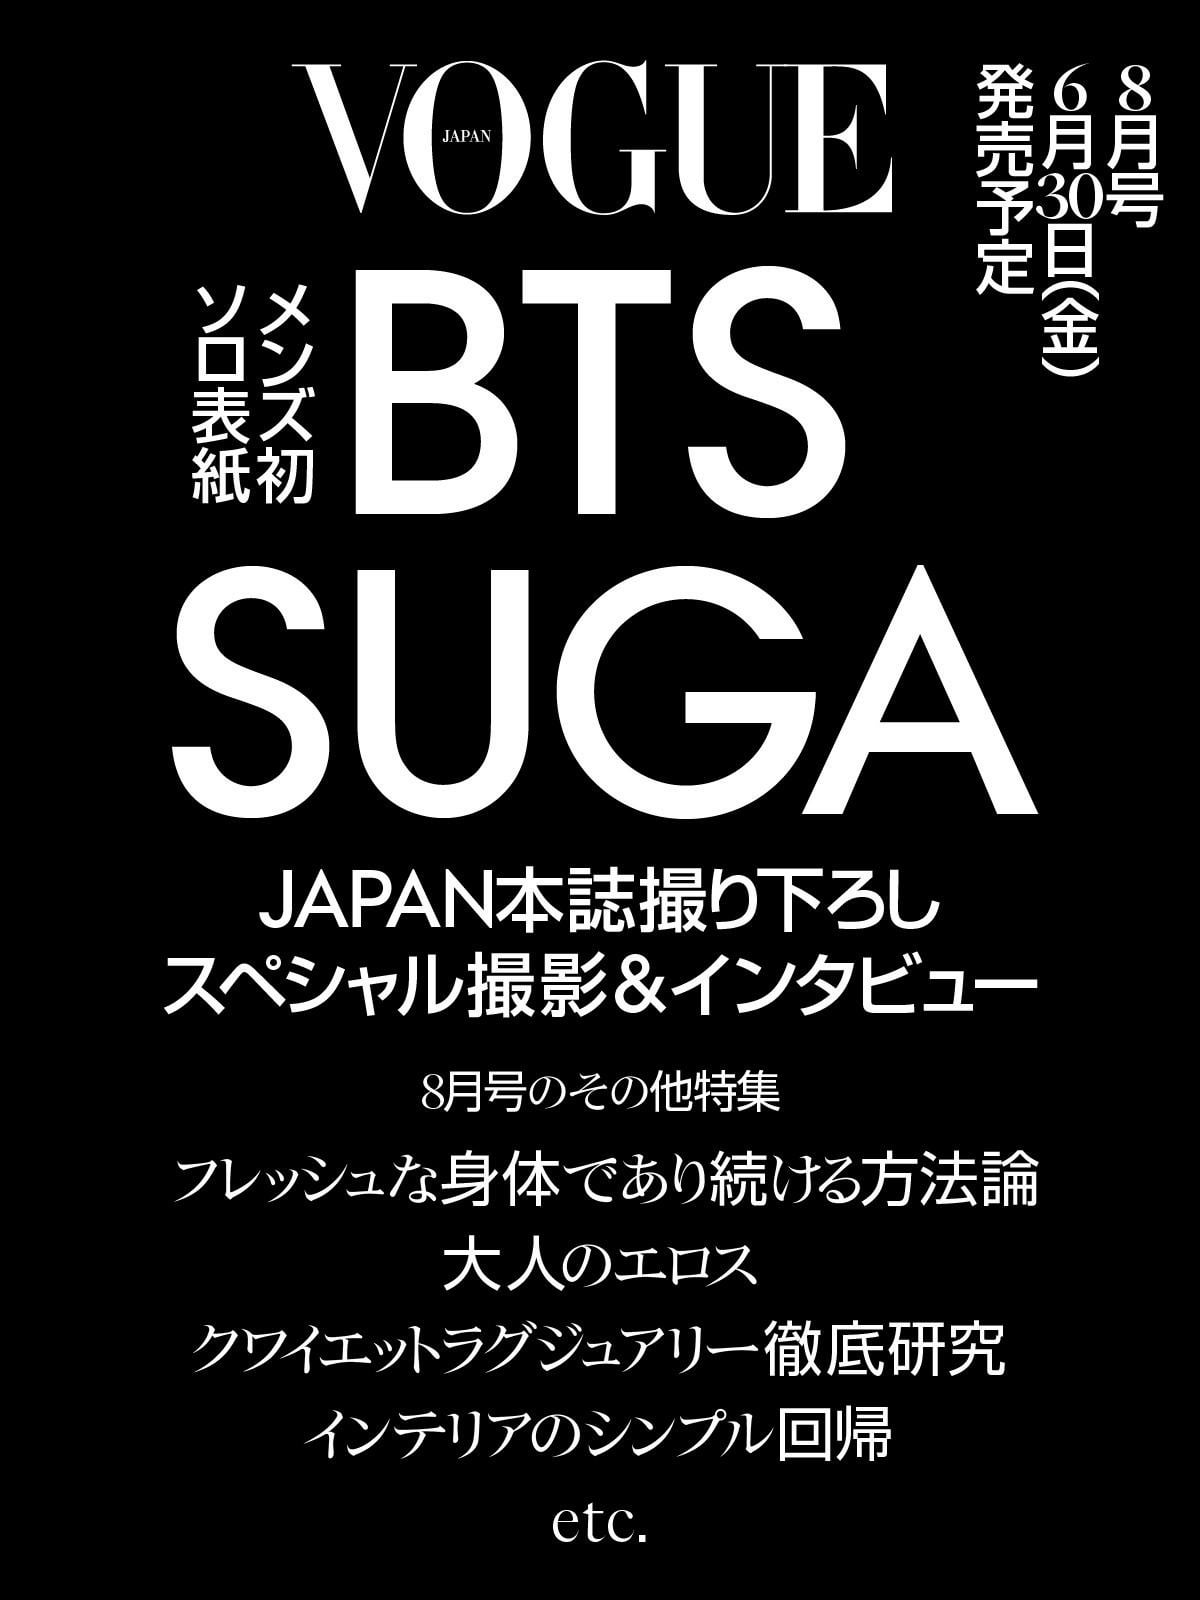 [Vogue Japan] Yoongi will be the cover star of the Aug 2023 issue of Vogue Japan, and makes history as the first solo male cover star - 020623